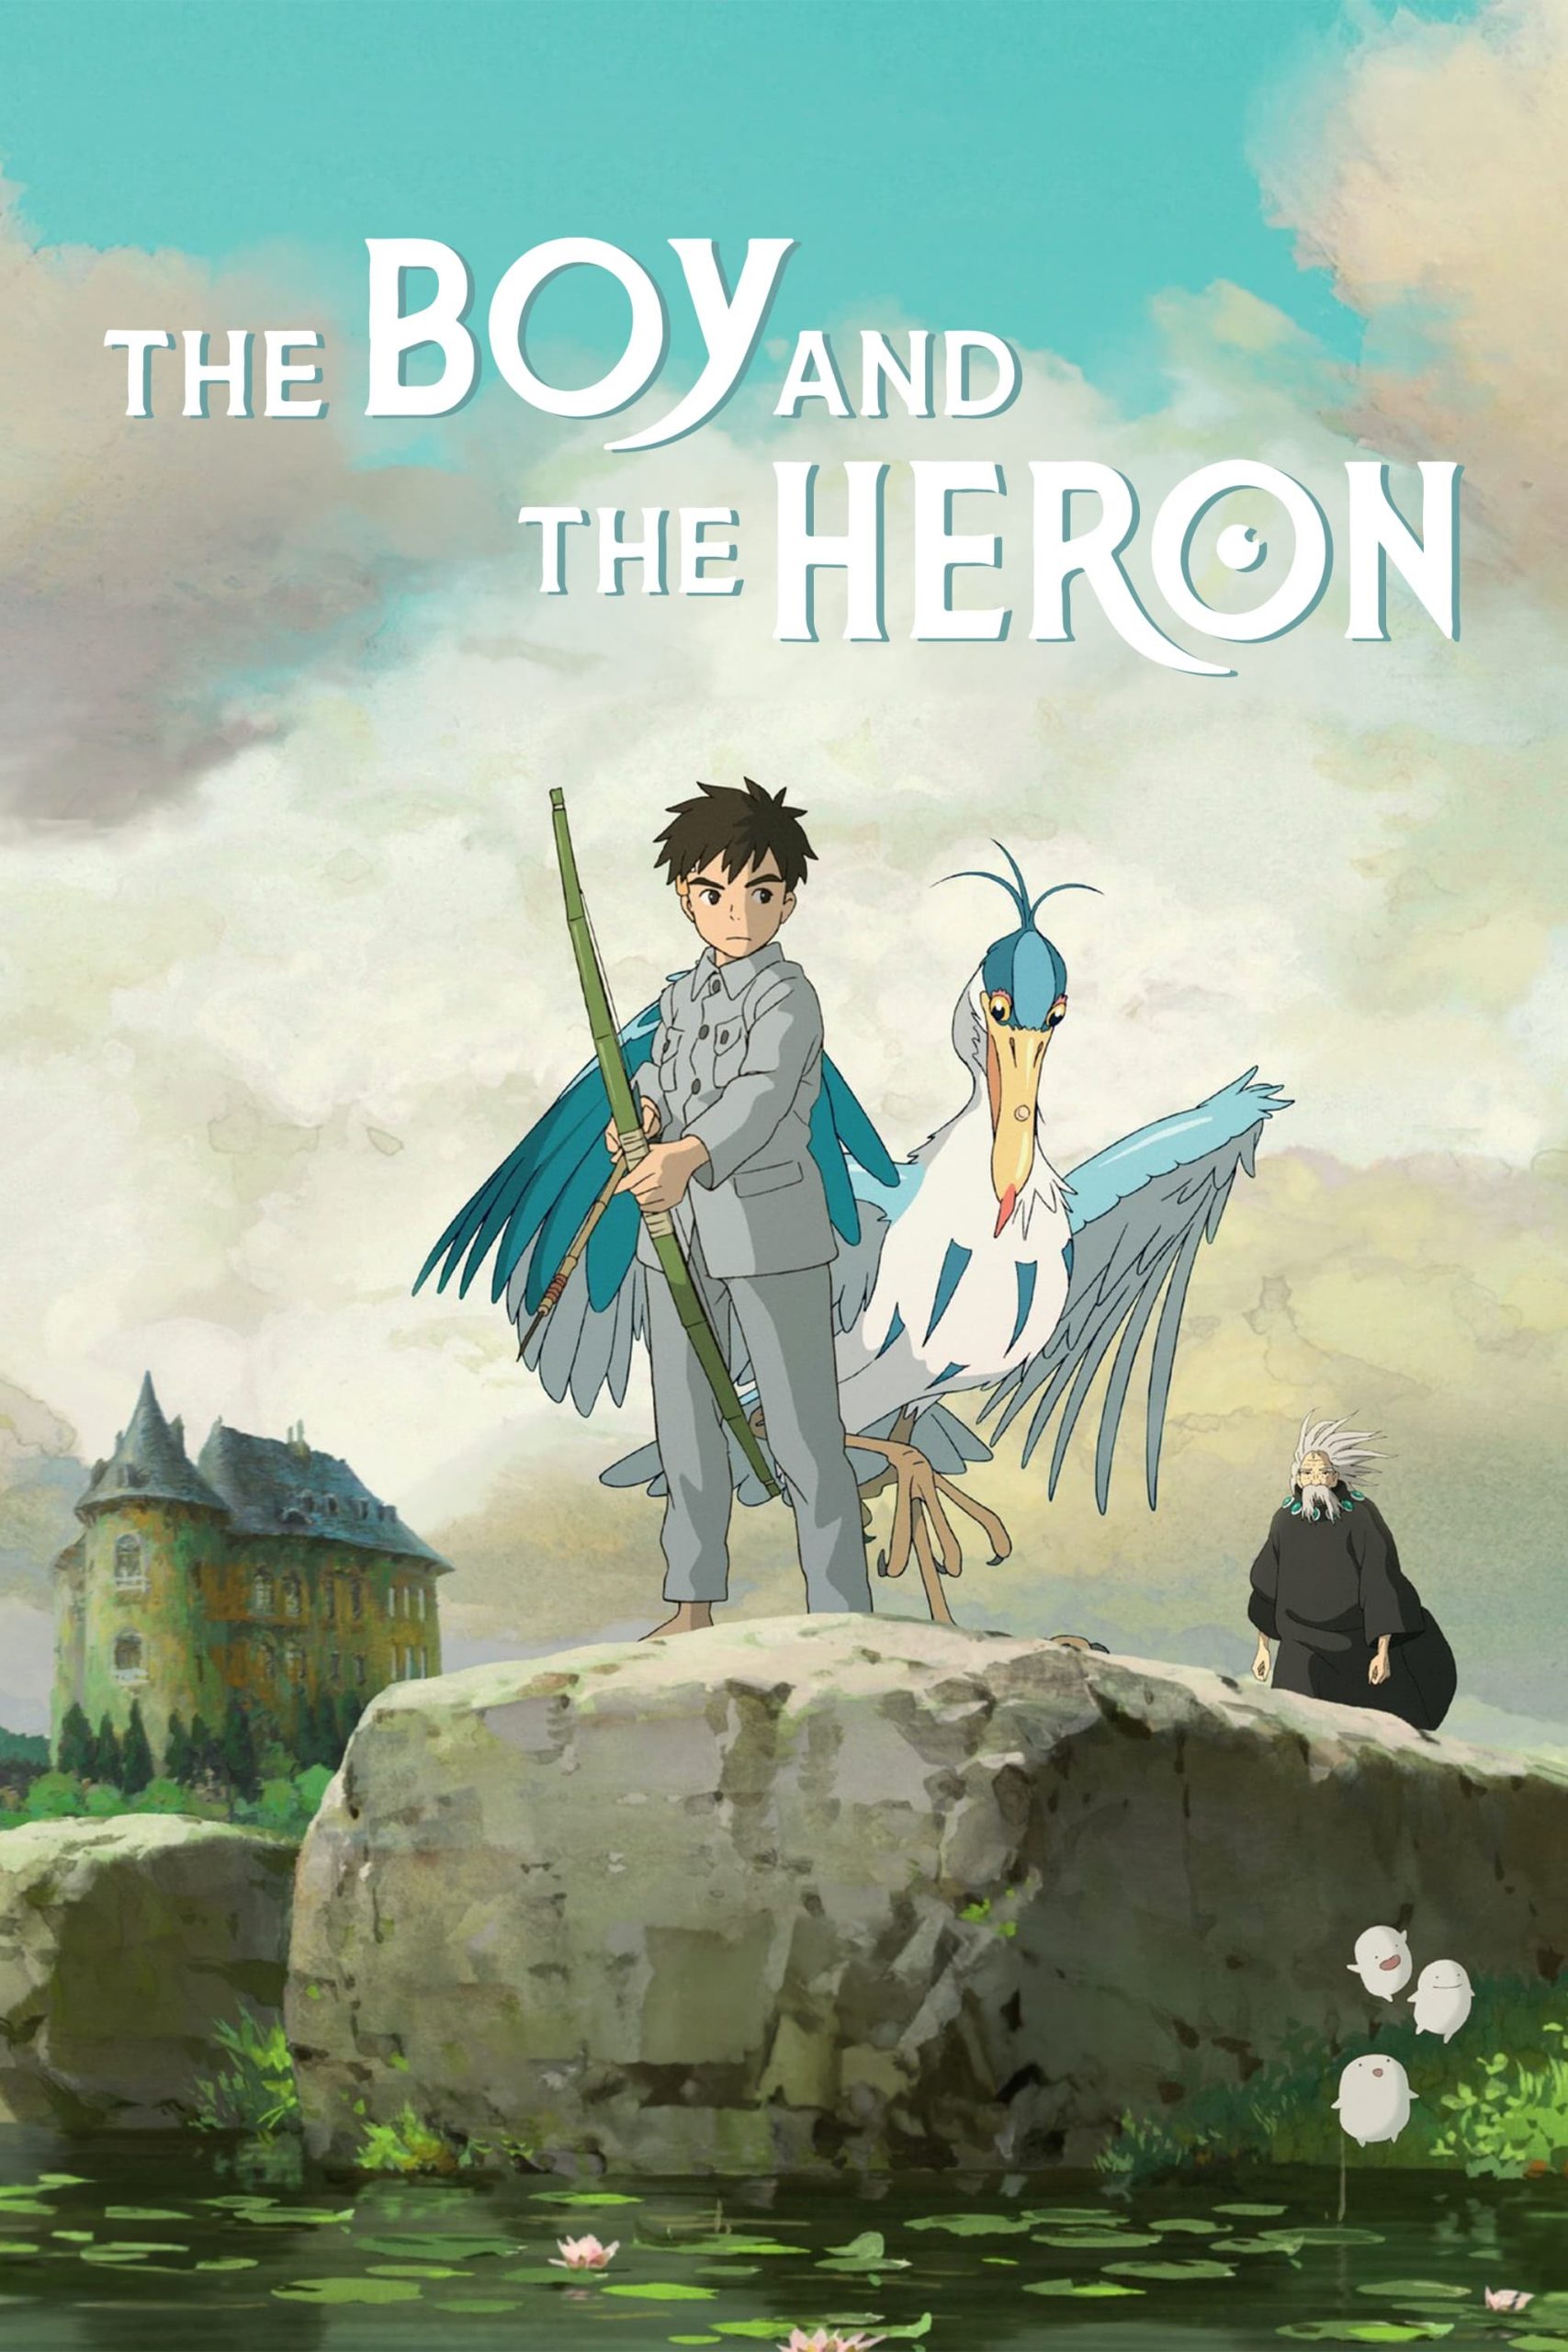 The Boy and the Heron Film Review